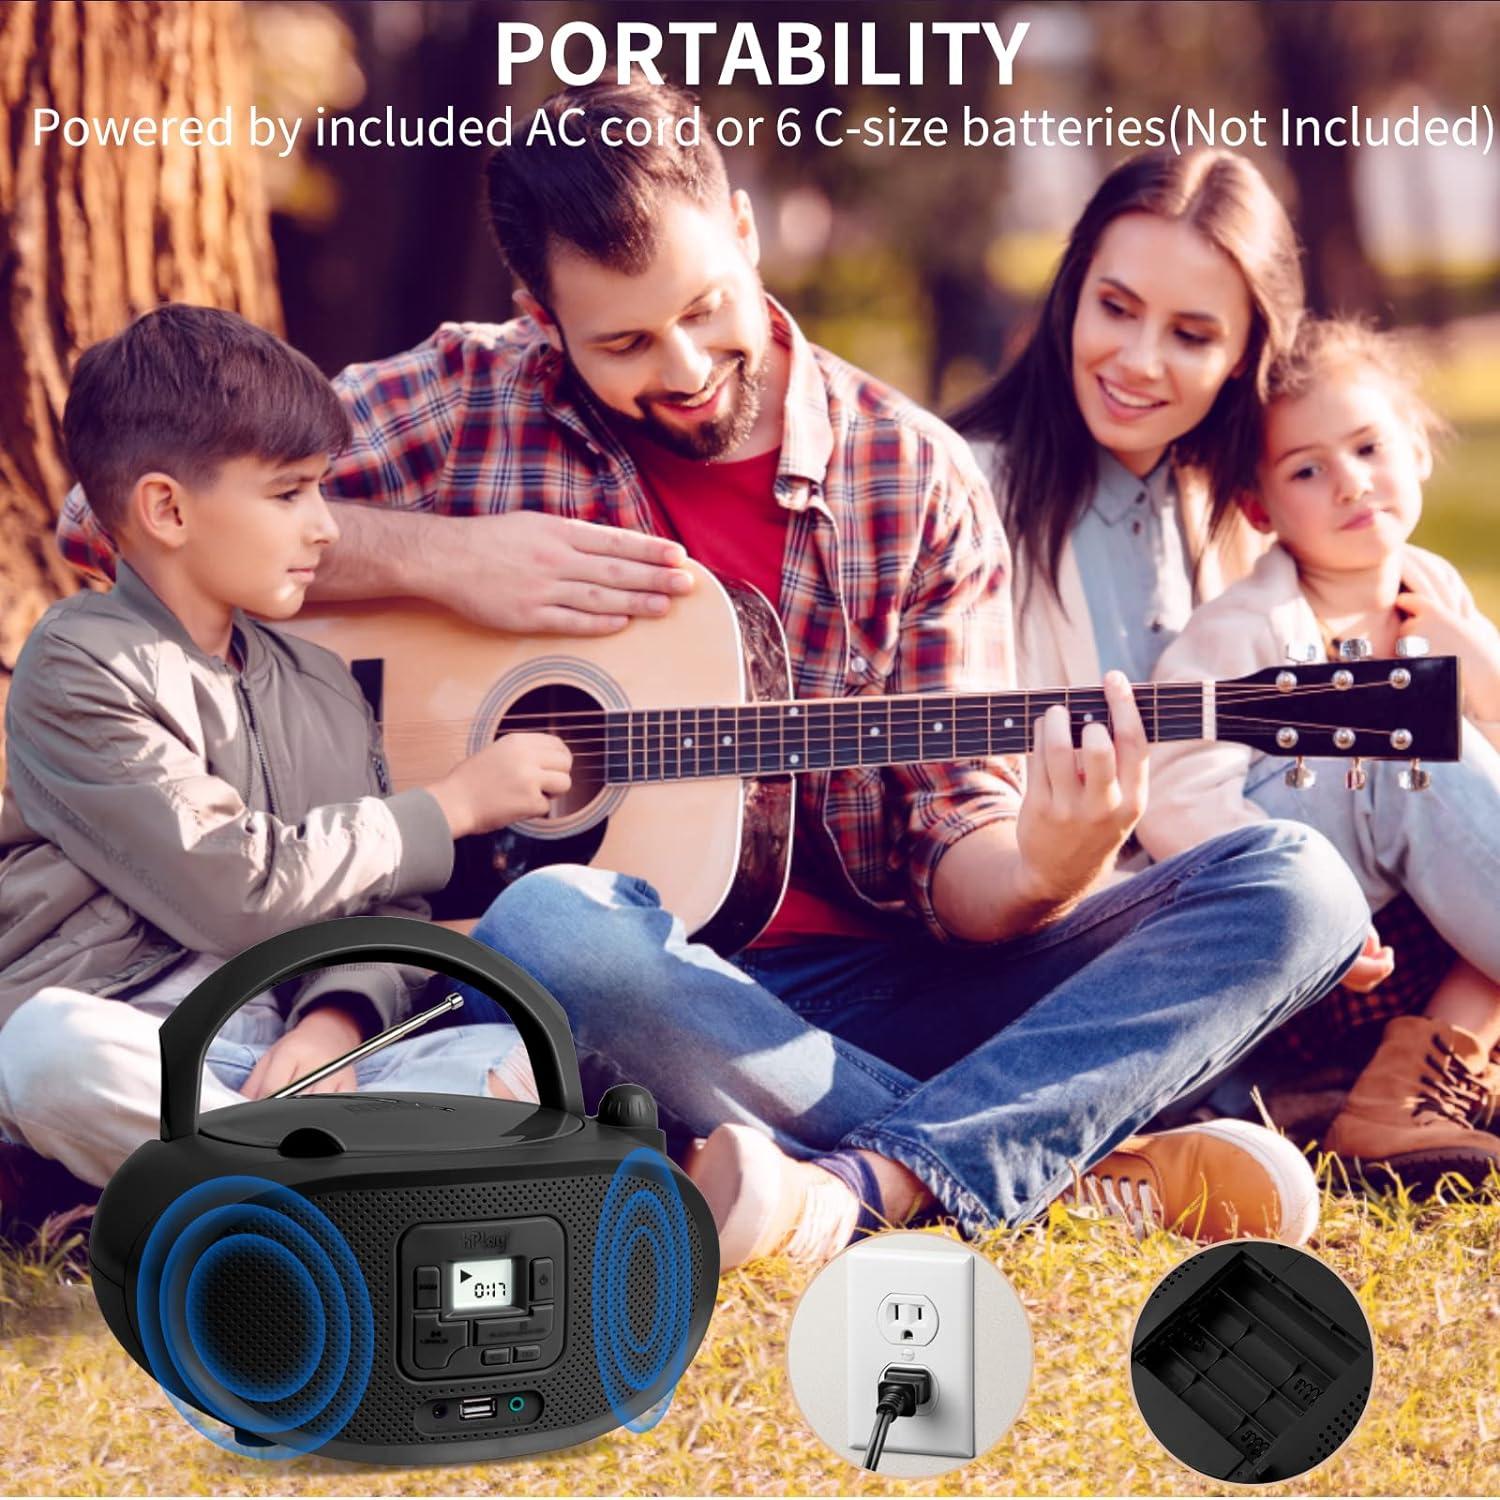 hPlay Gummy GC04B Portable CD Player Boombox with Digital Tunning